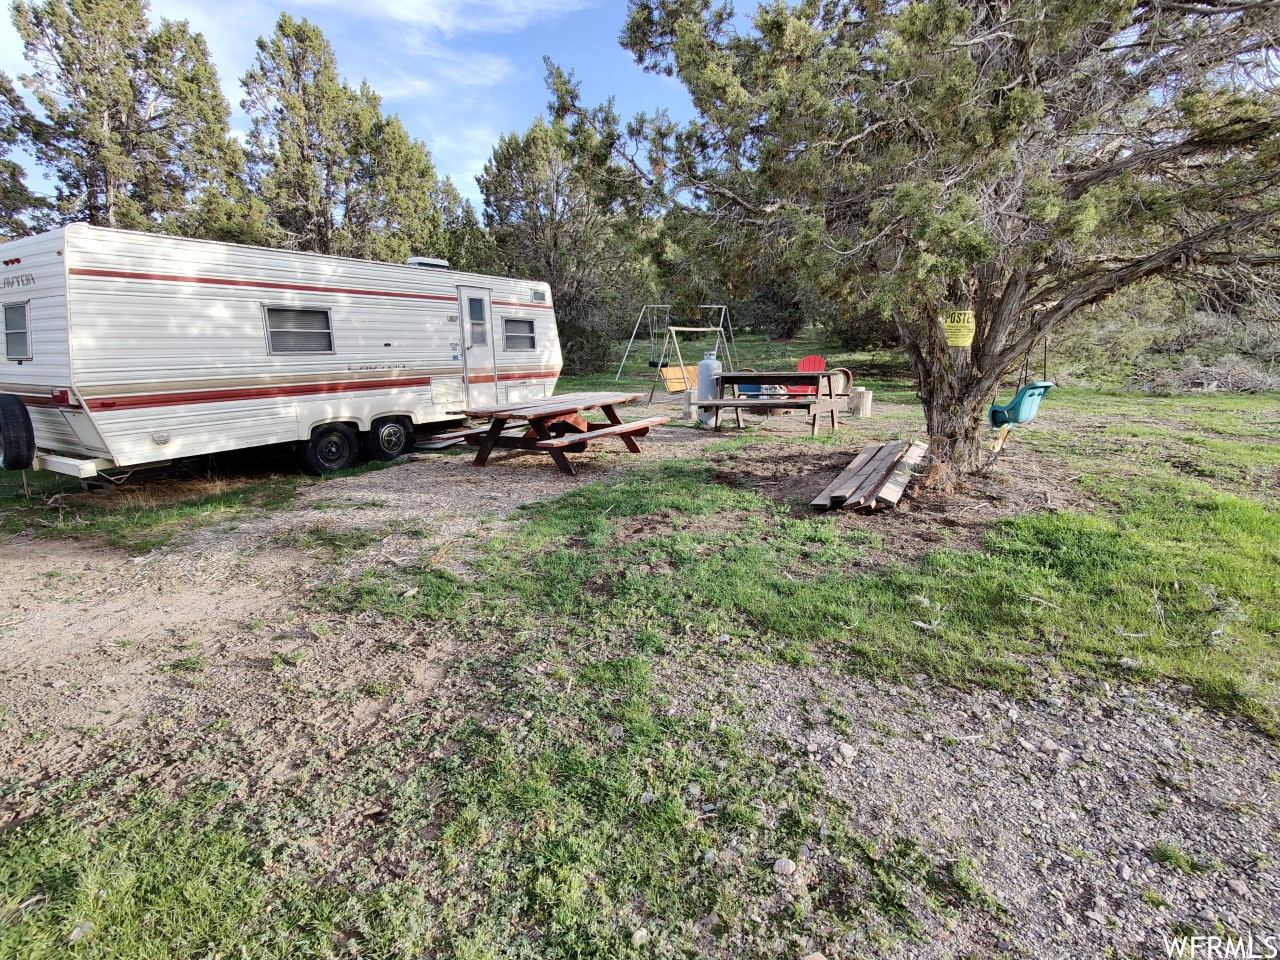 Camping area with multiple campsites on west parcel